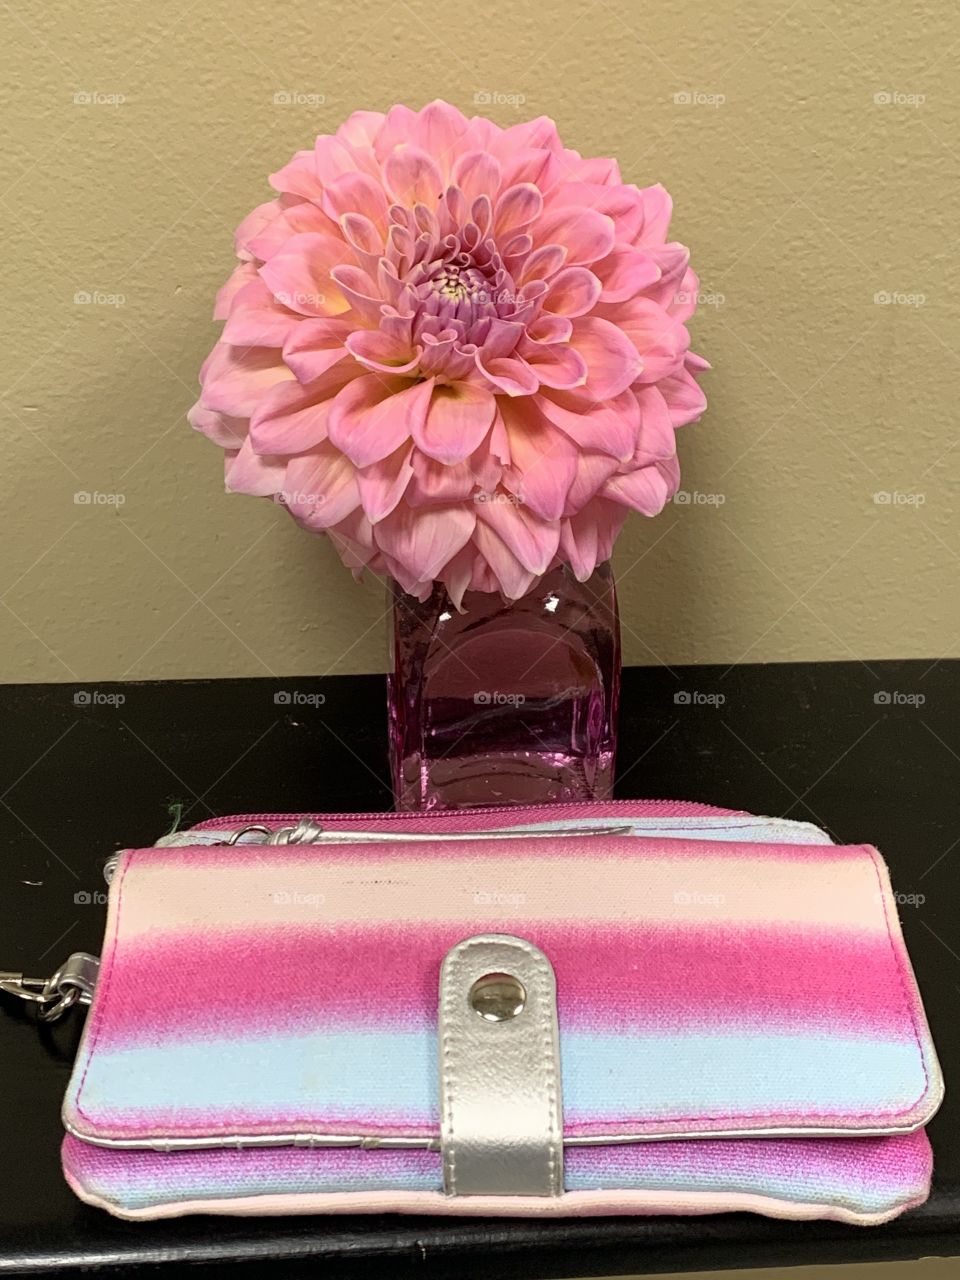 Pink flower in pink vase. Apricot, pink, purple, and light blue wallet bag with silver buckle.